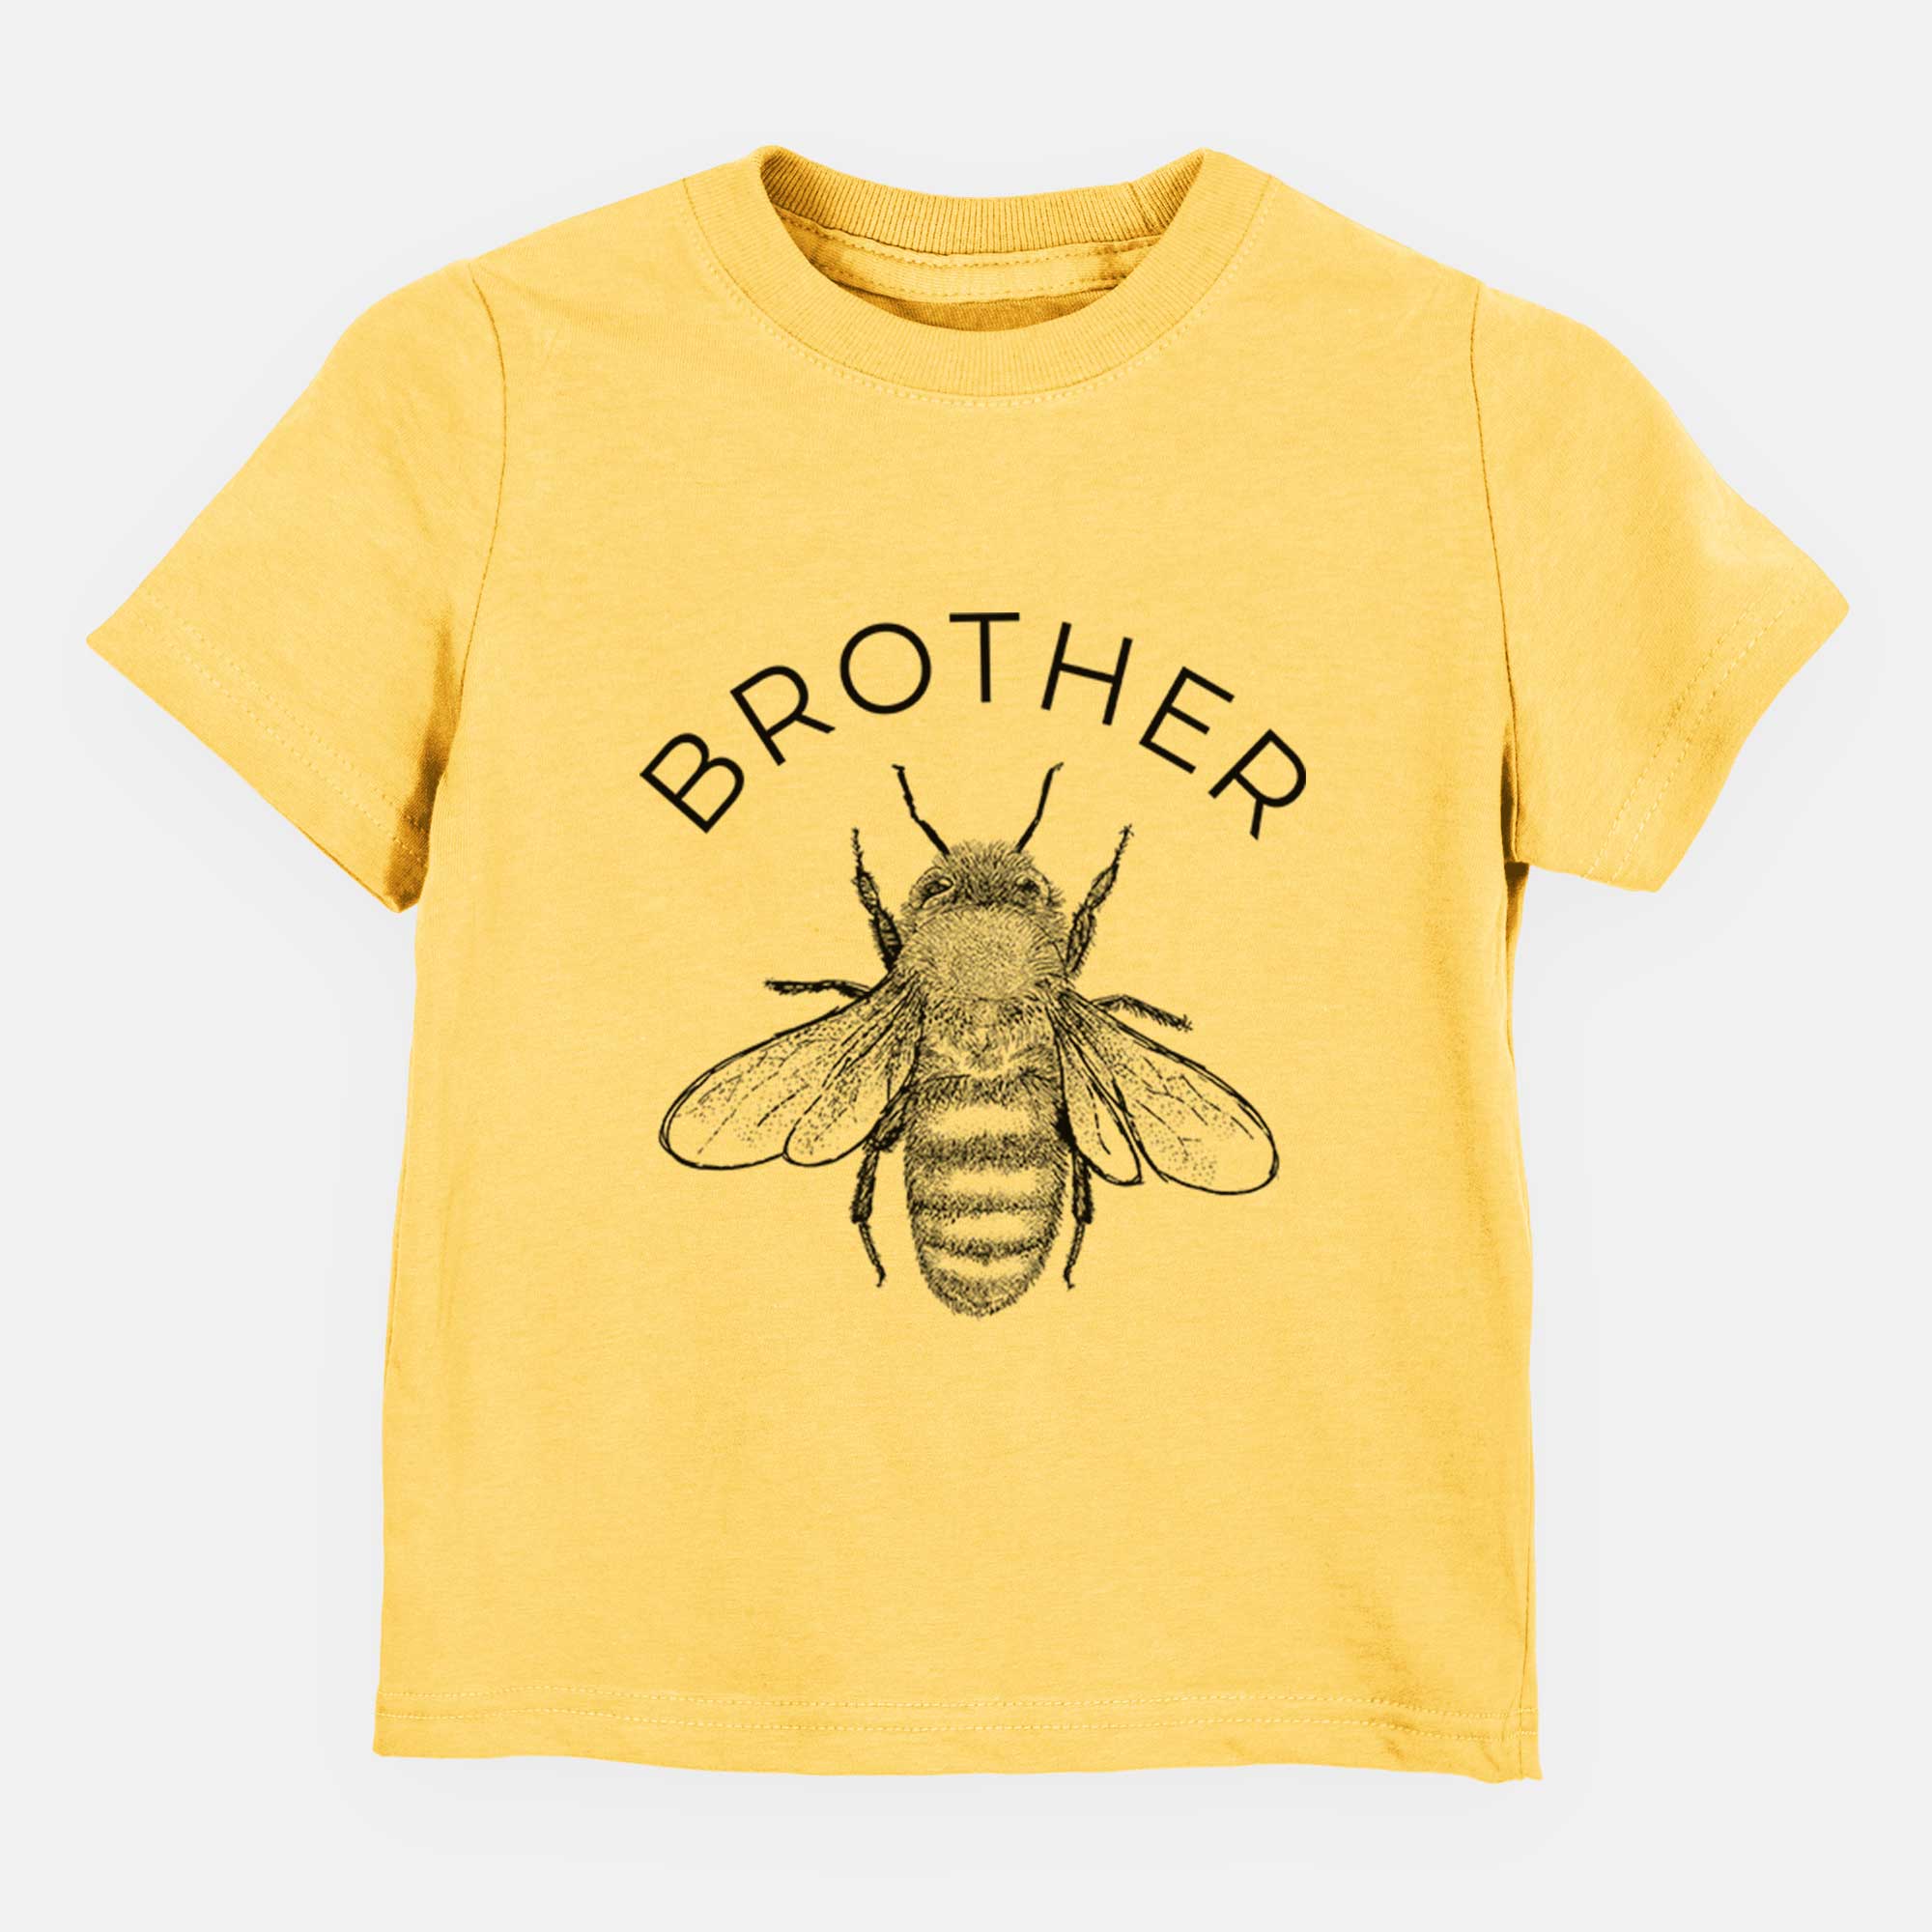 Brother Bee - Kids Shirt by Because Tees